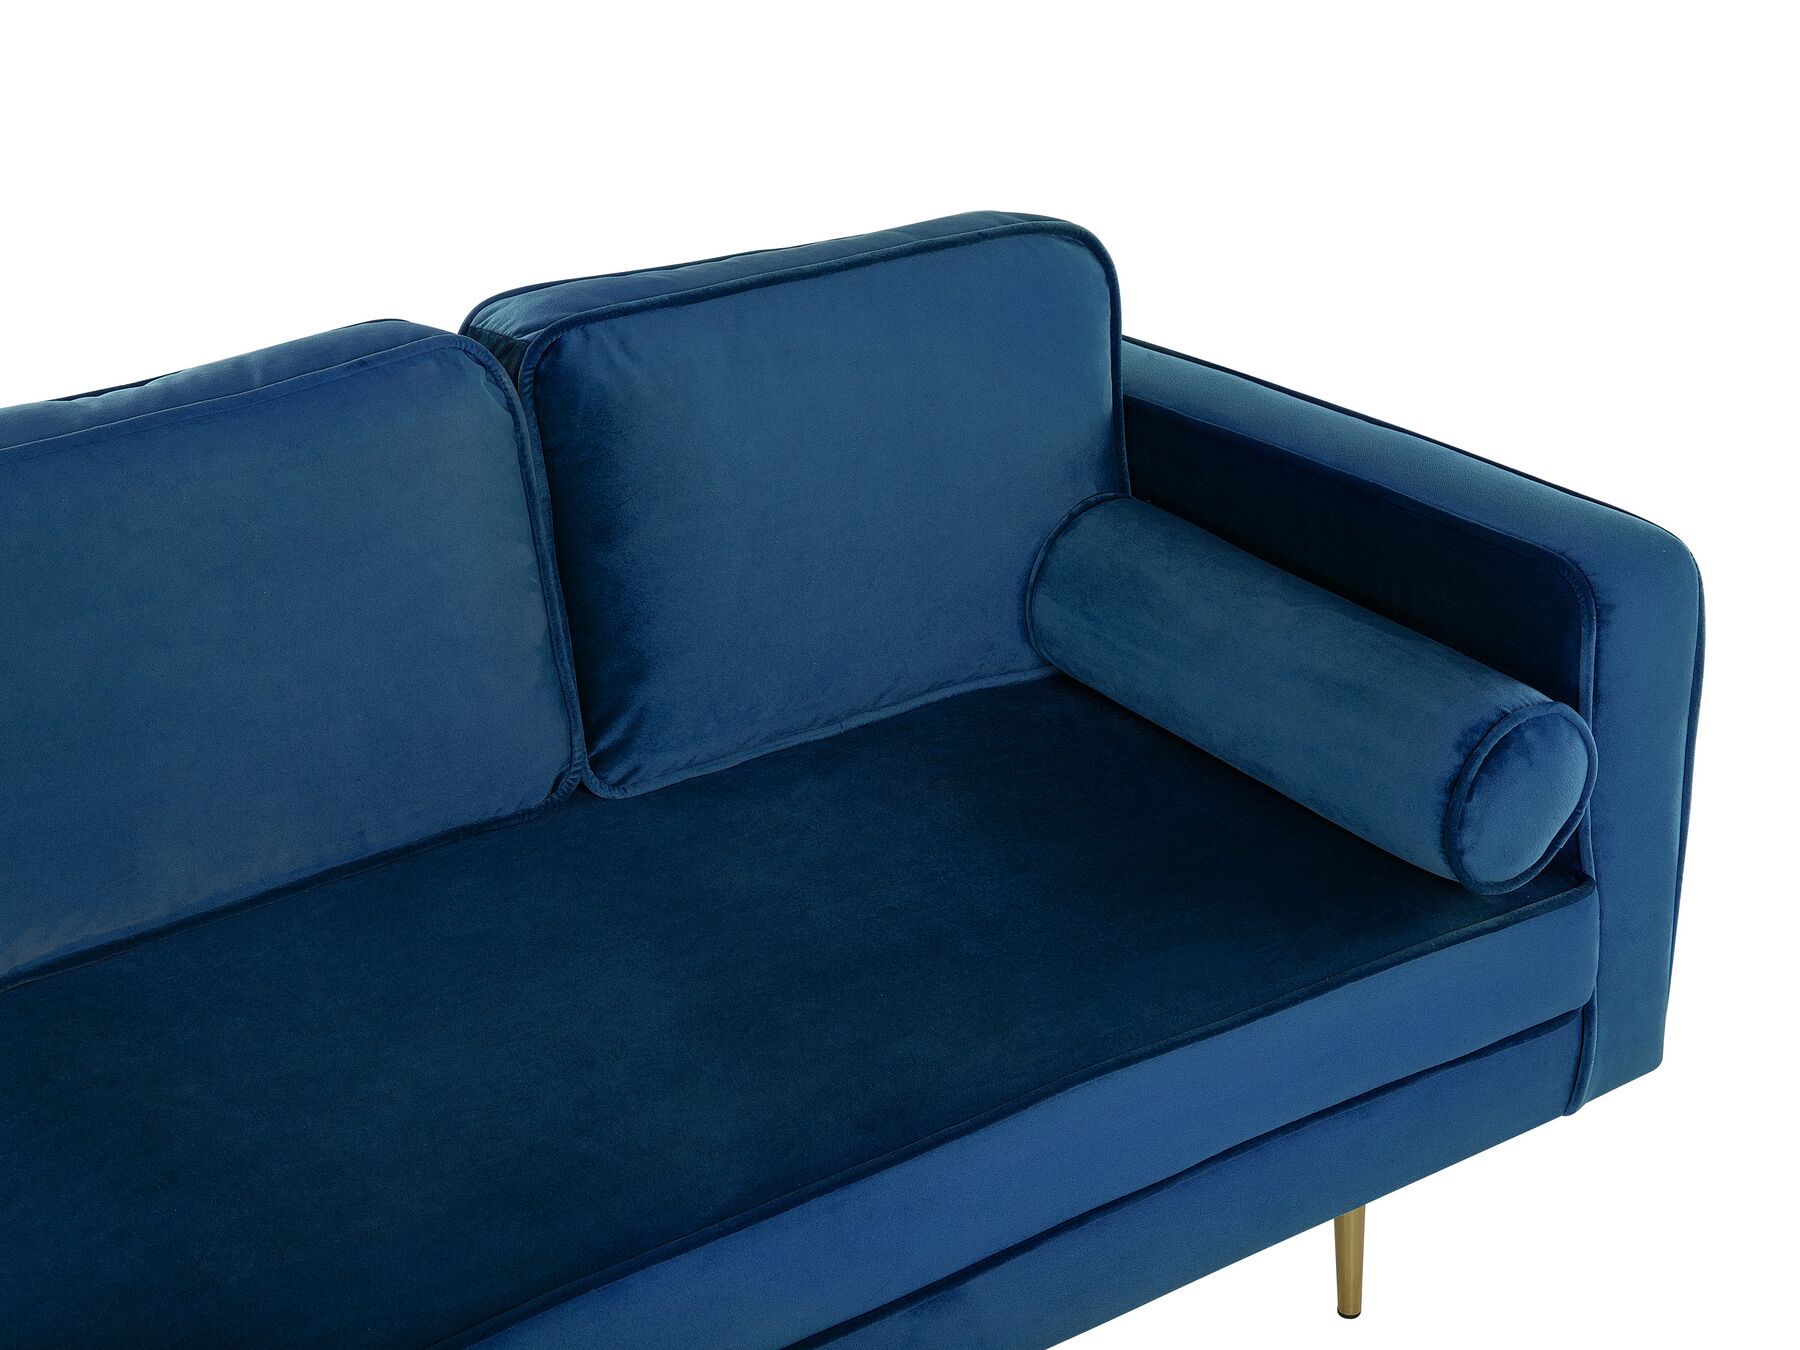 Miramas Right Hand Chaise Lounger (Blue)